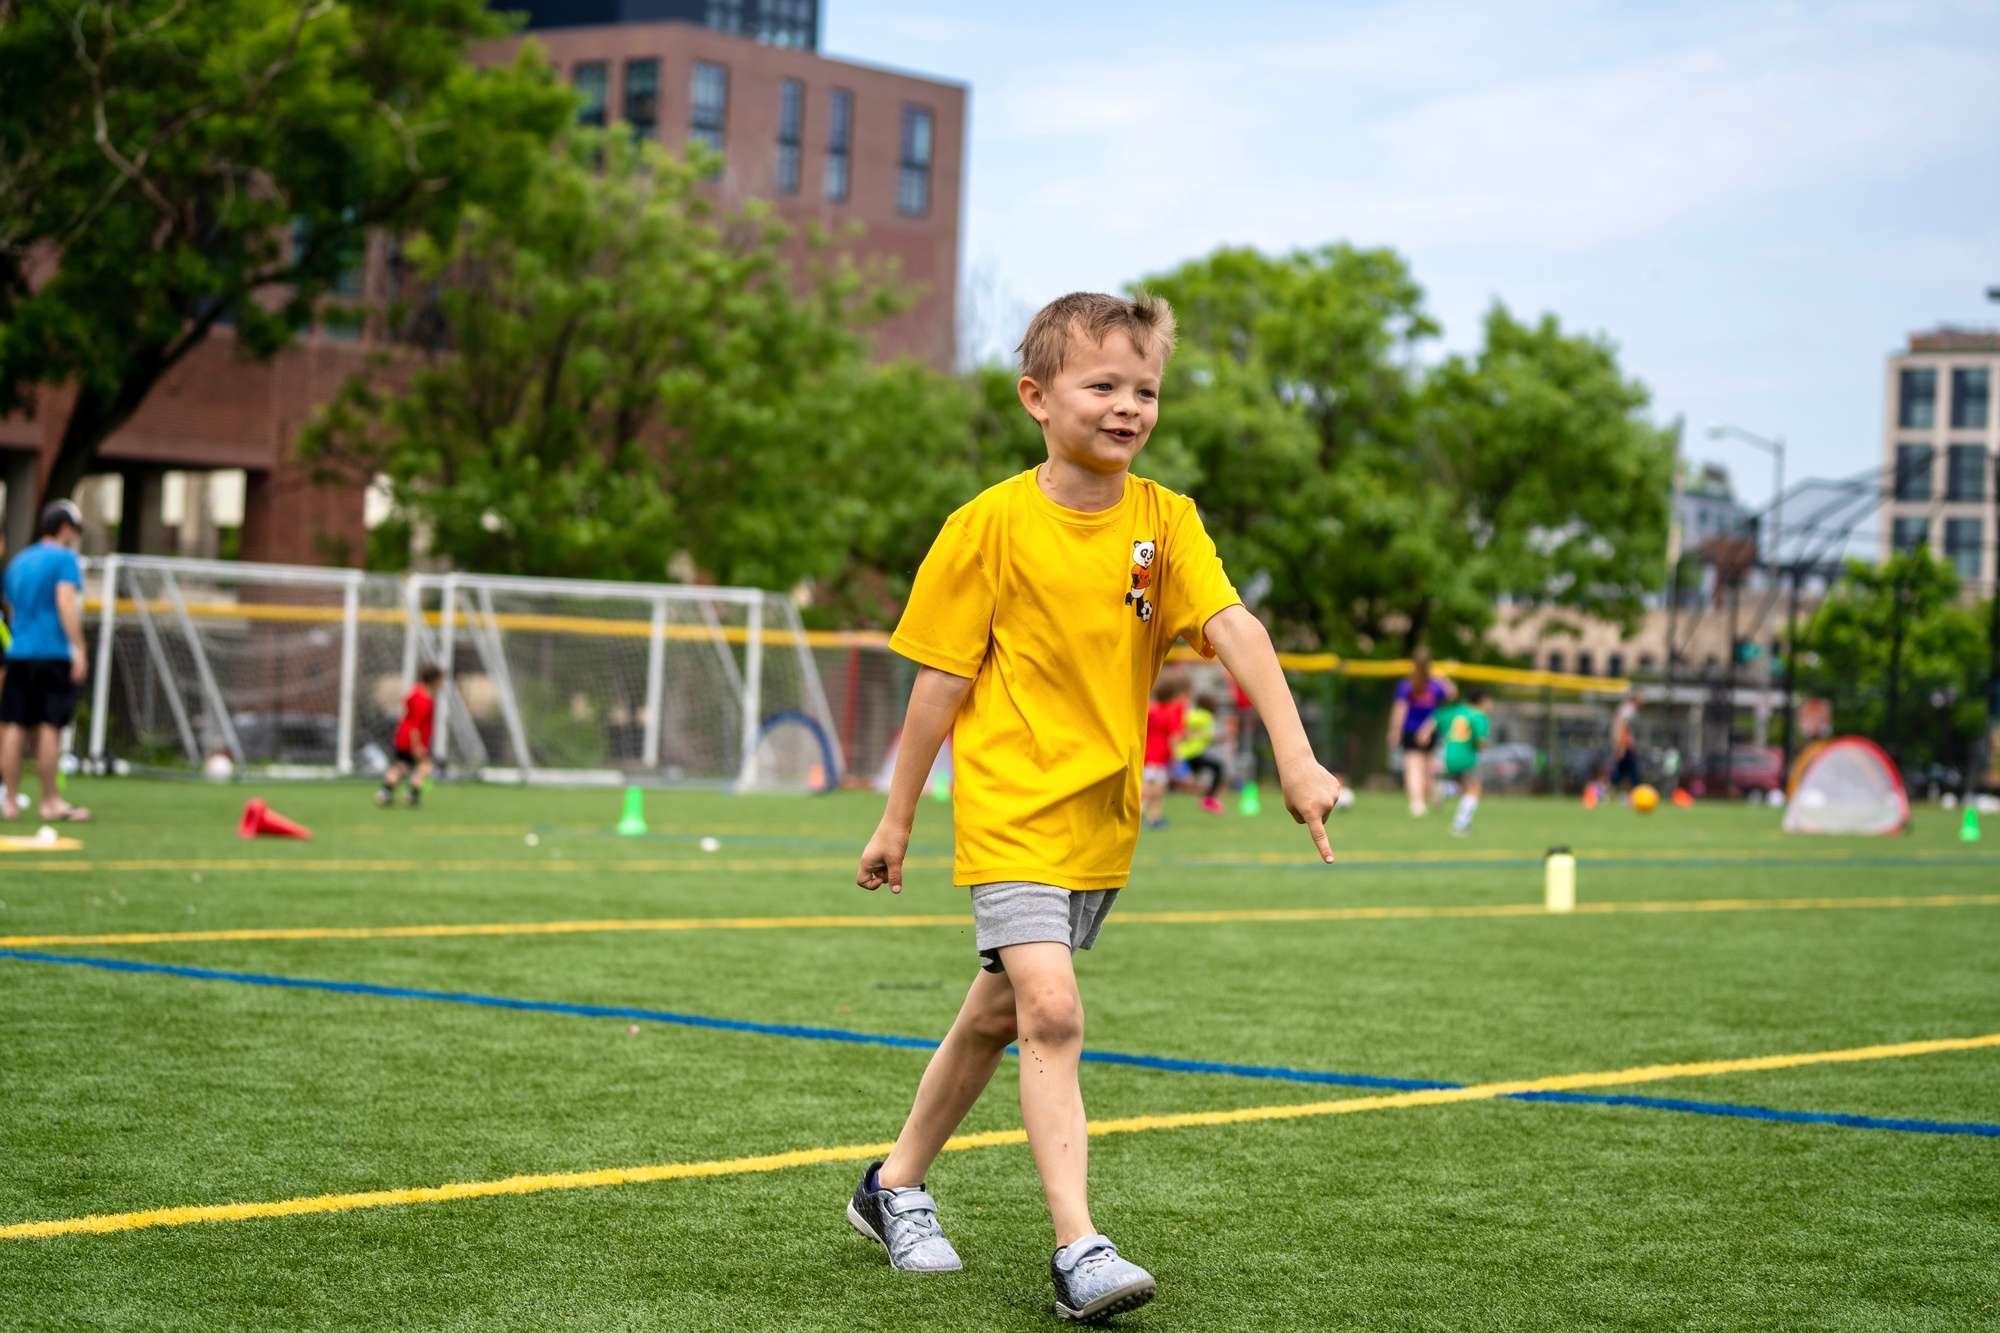 Dc-way-soccer-club-for-kids-in-washington-dc-capitol-hill-league-at-brentwood-hamilton-park-06-03-2023 0067.jpg